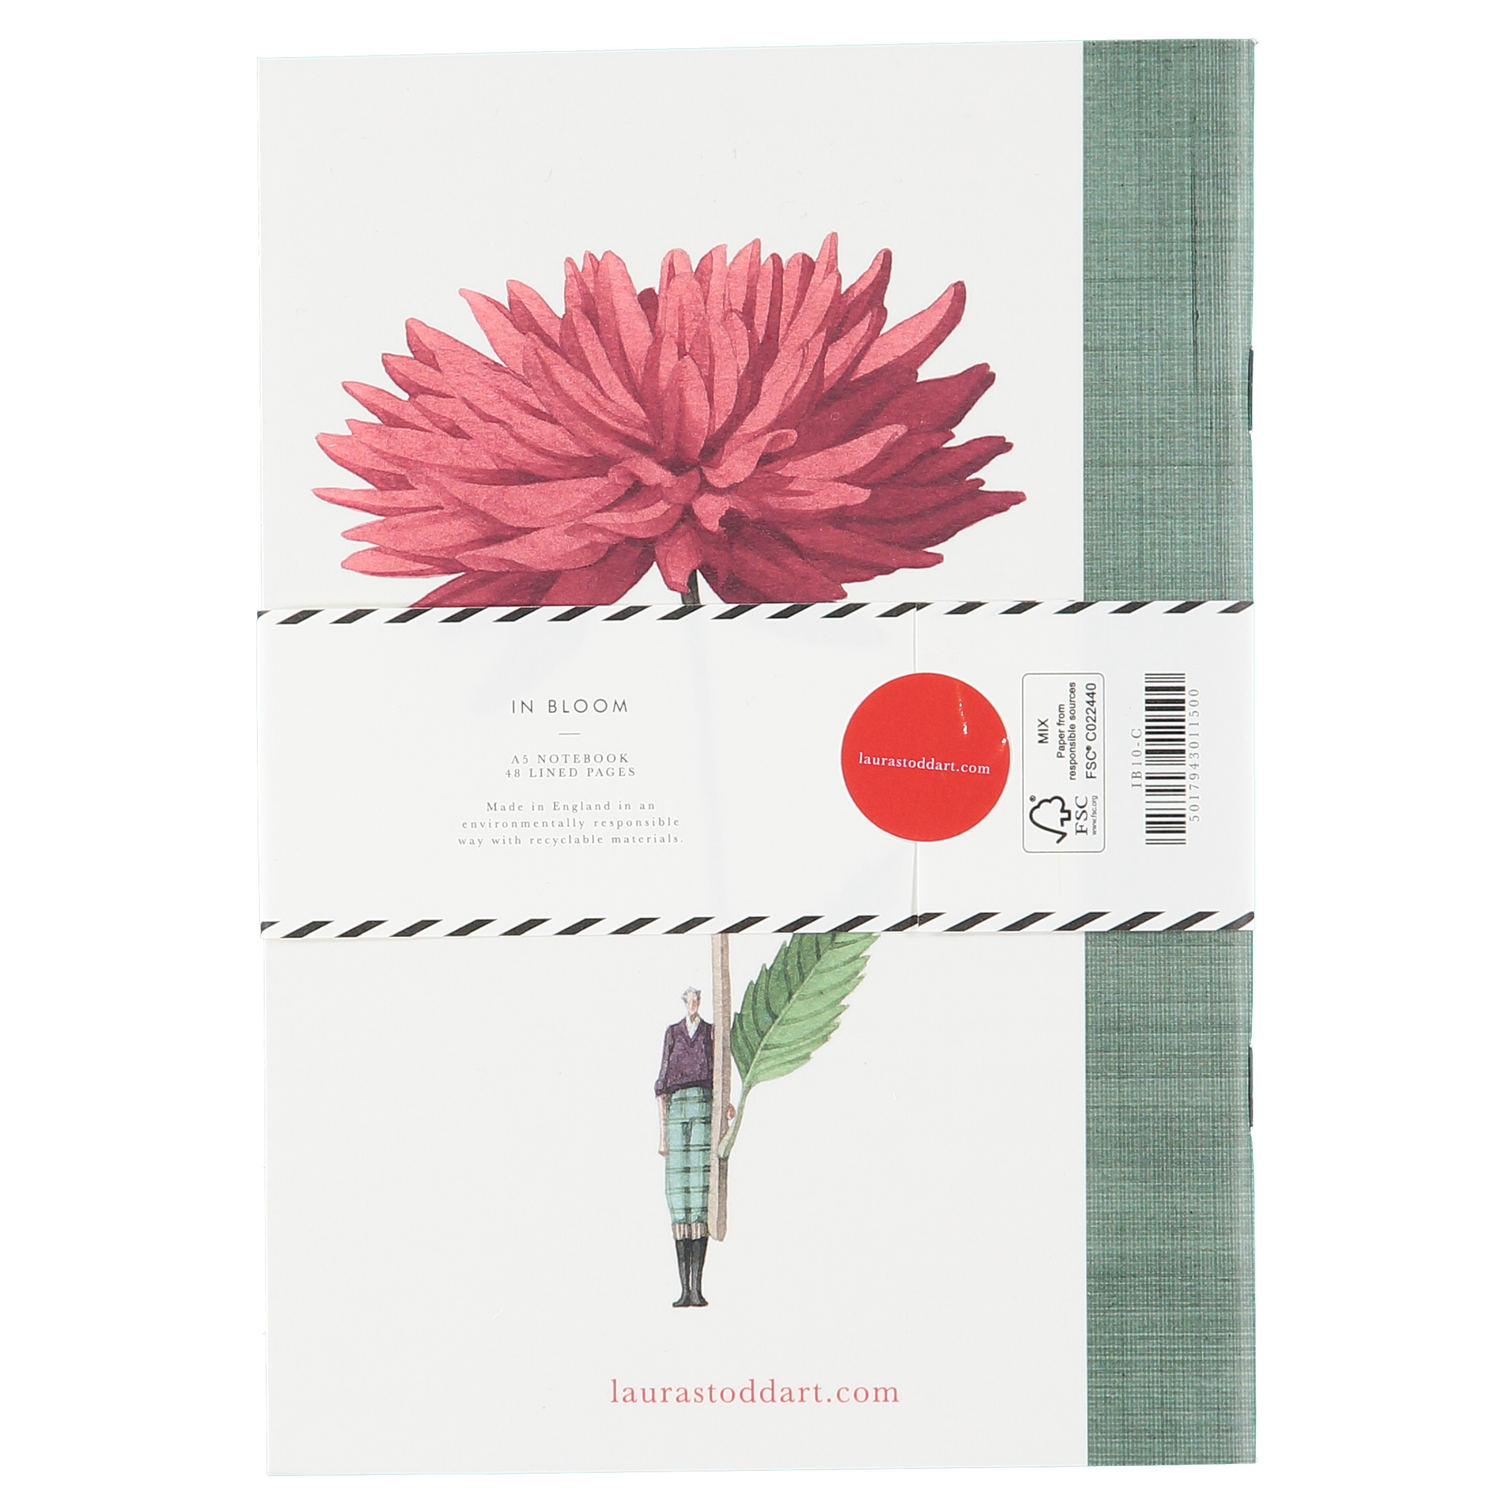 fsc paper, notebook, flowers, illustration, made in england, environmentally responsible, recyclable